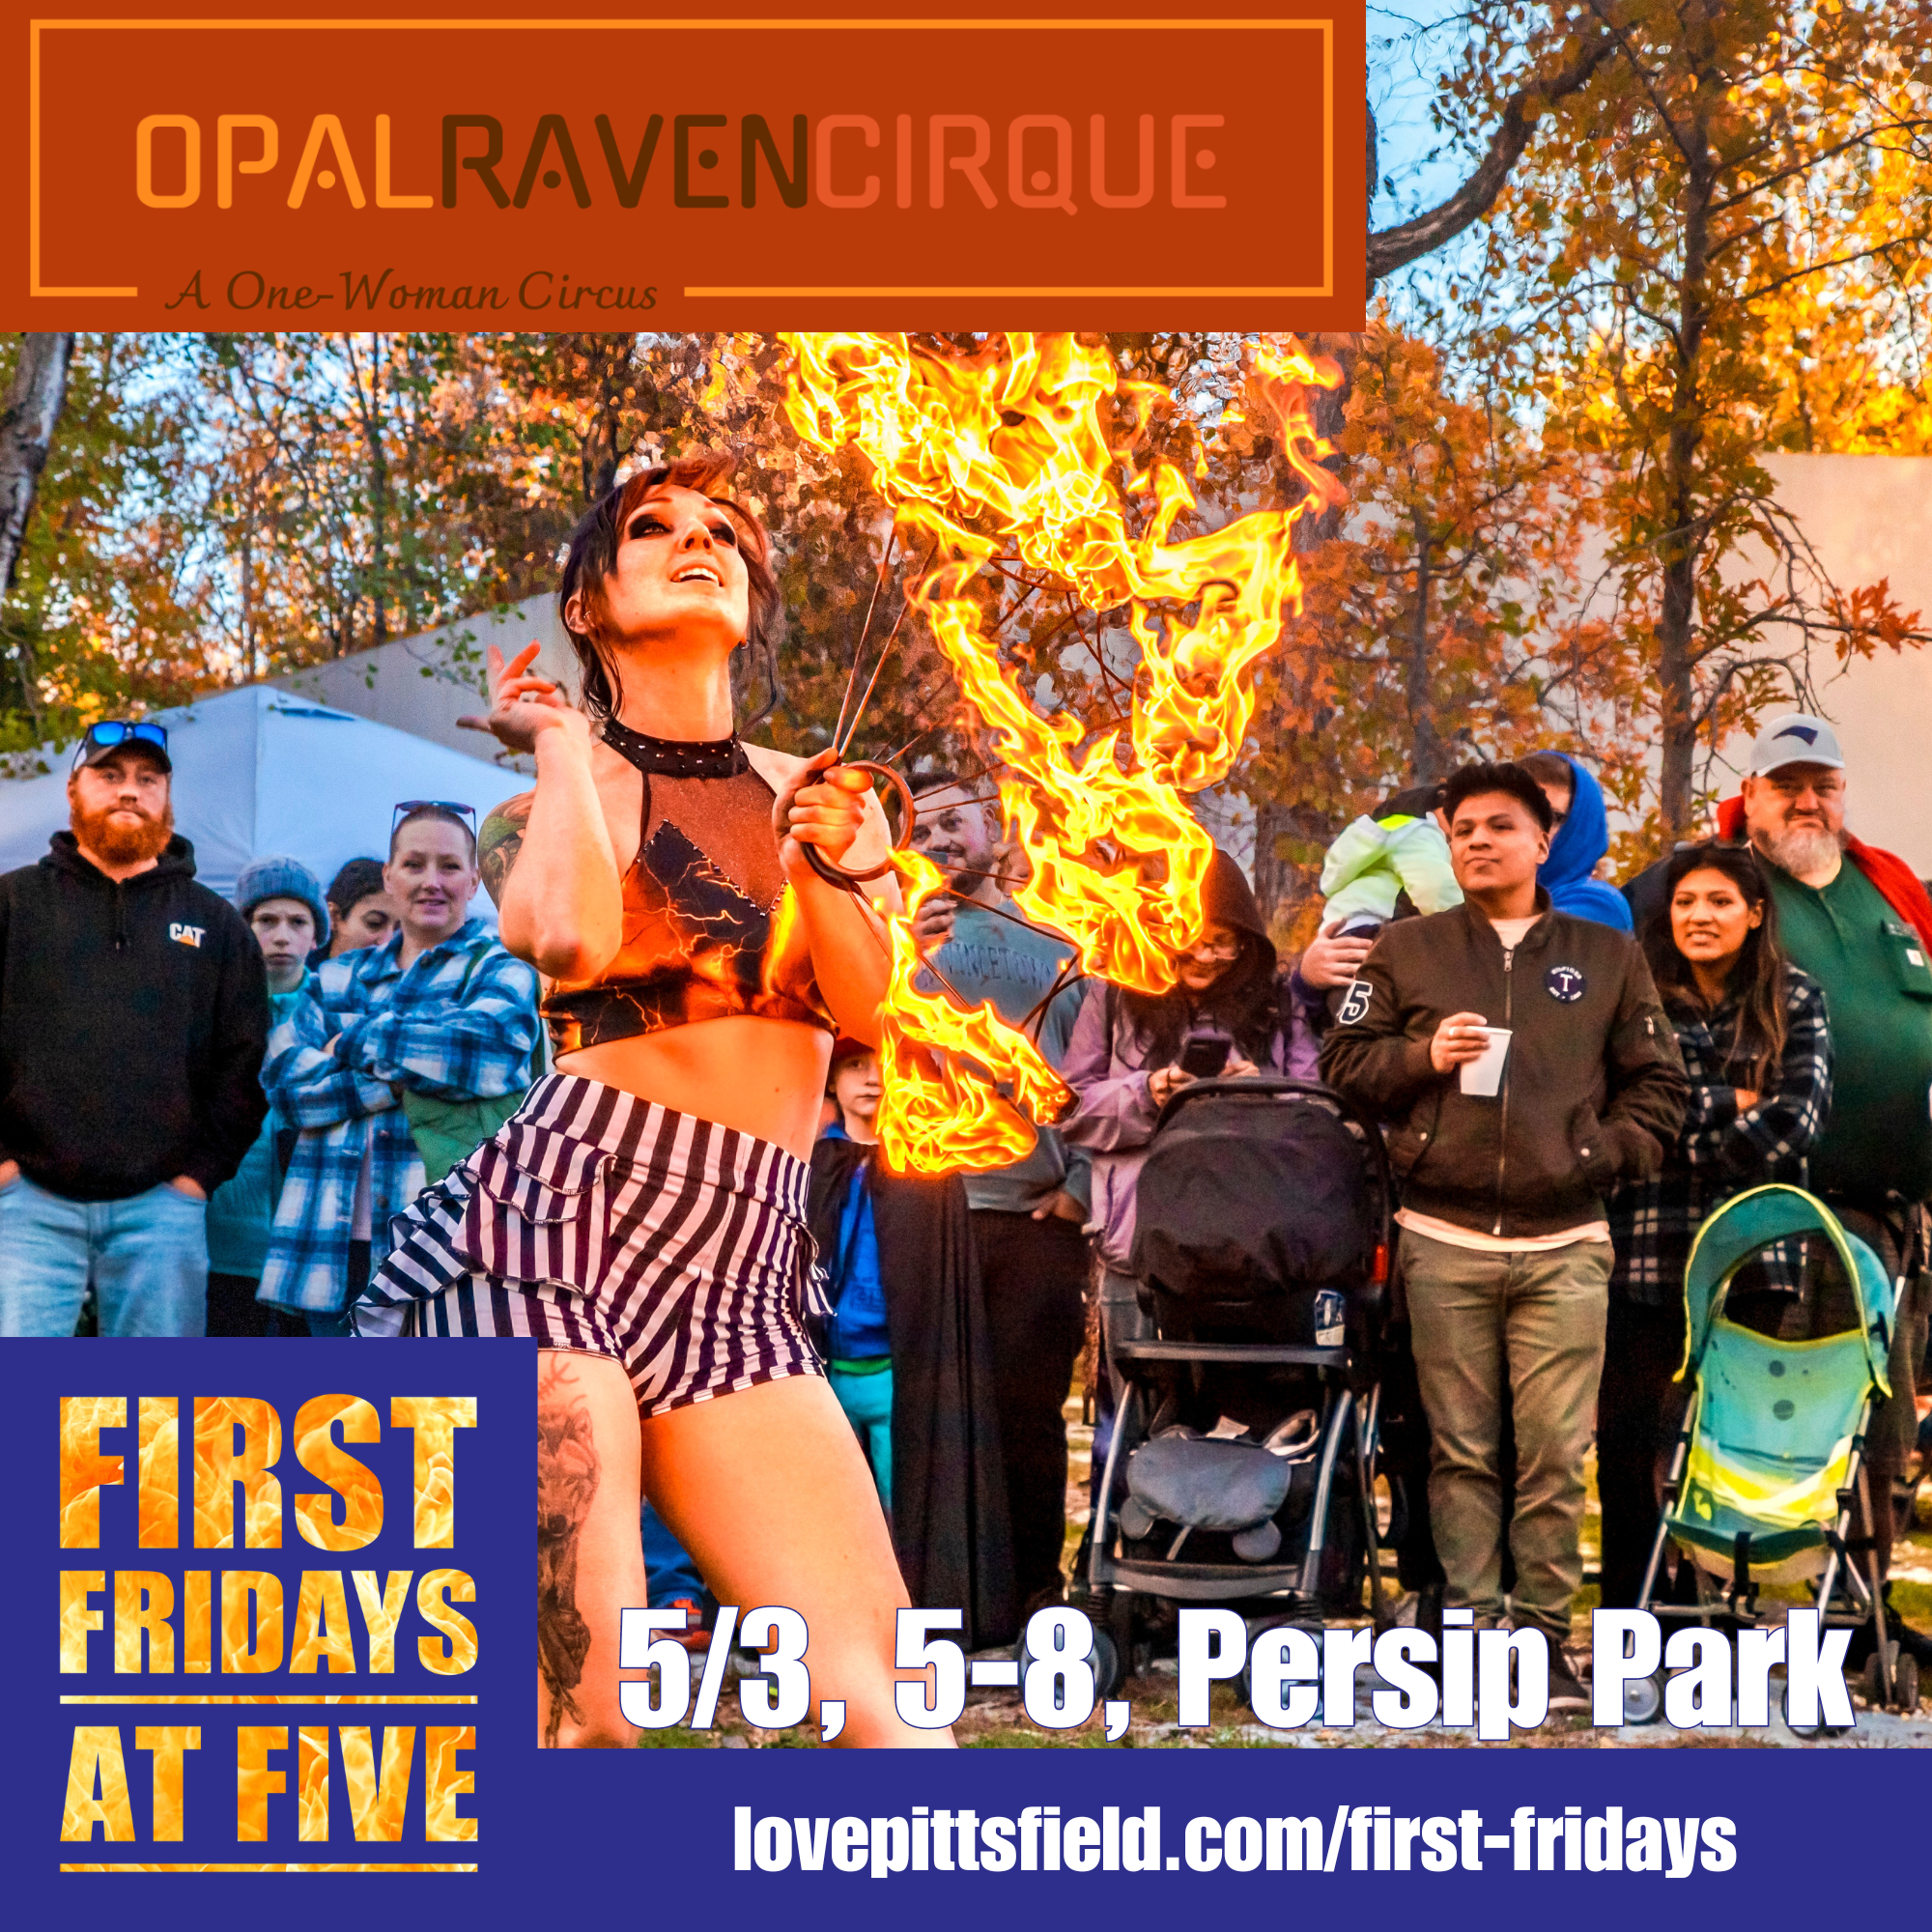 Fire Dancing with Opal Raven Cirque!